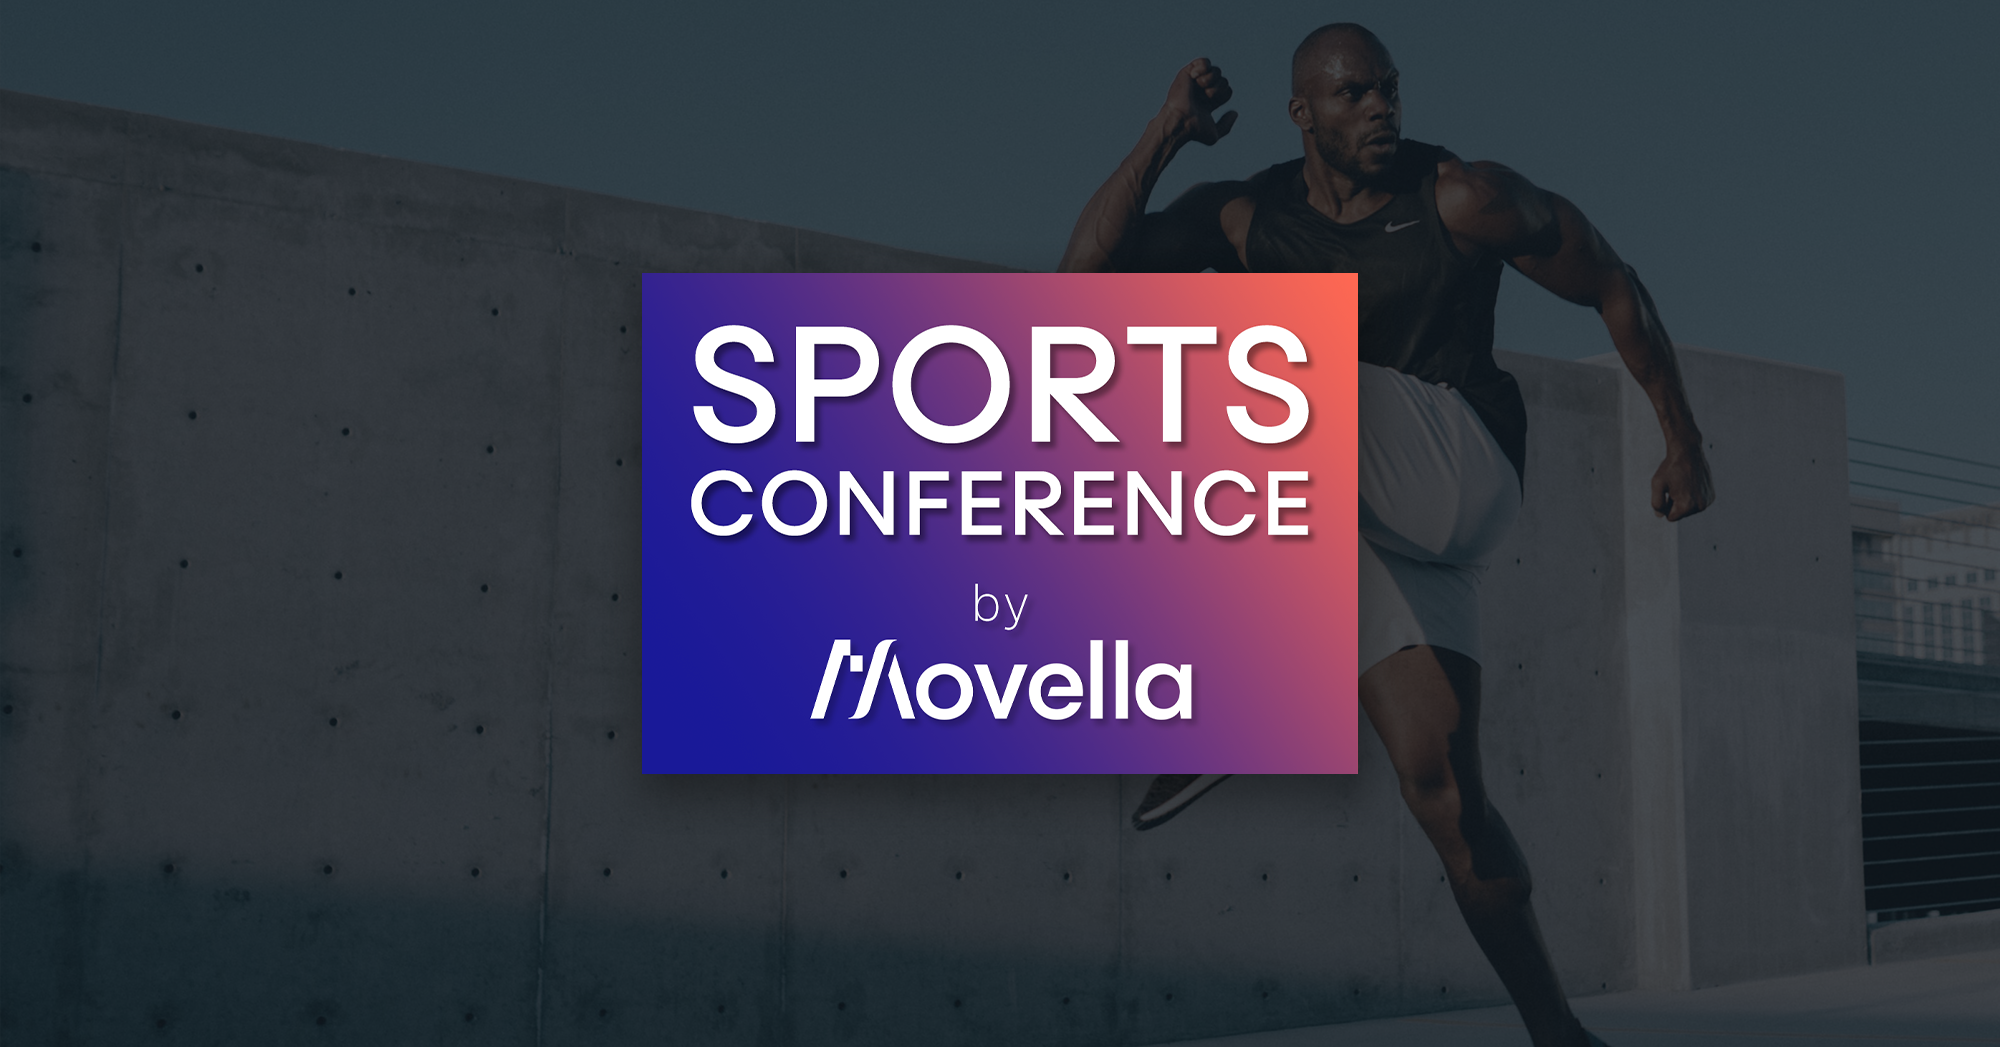 Movella Gathers Top Minds in the Sports Industry to Share Innovation and Developments